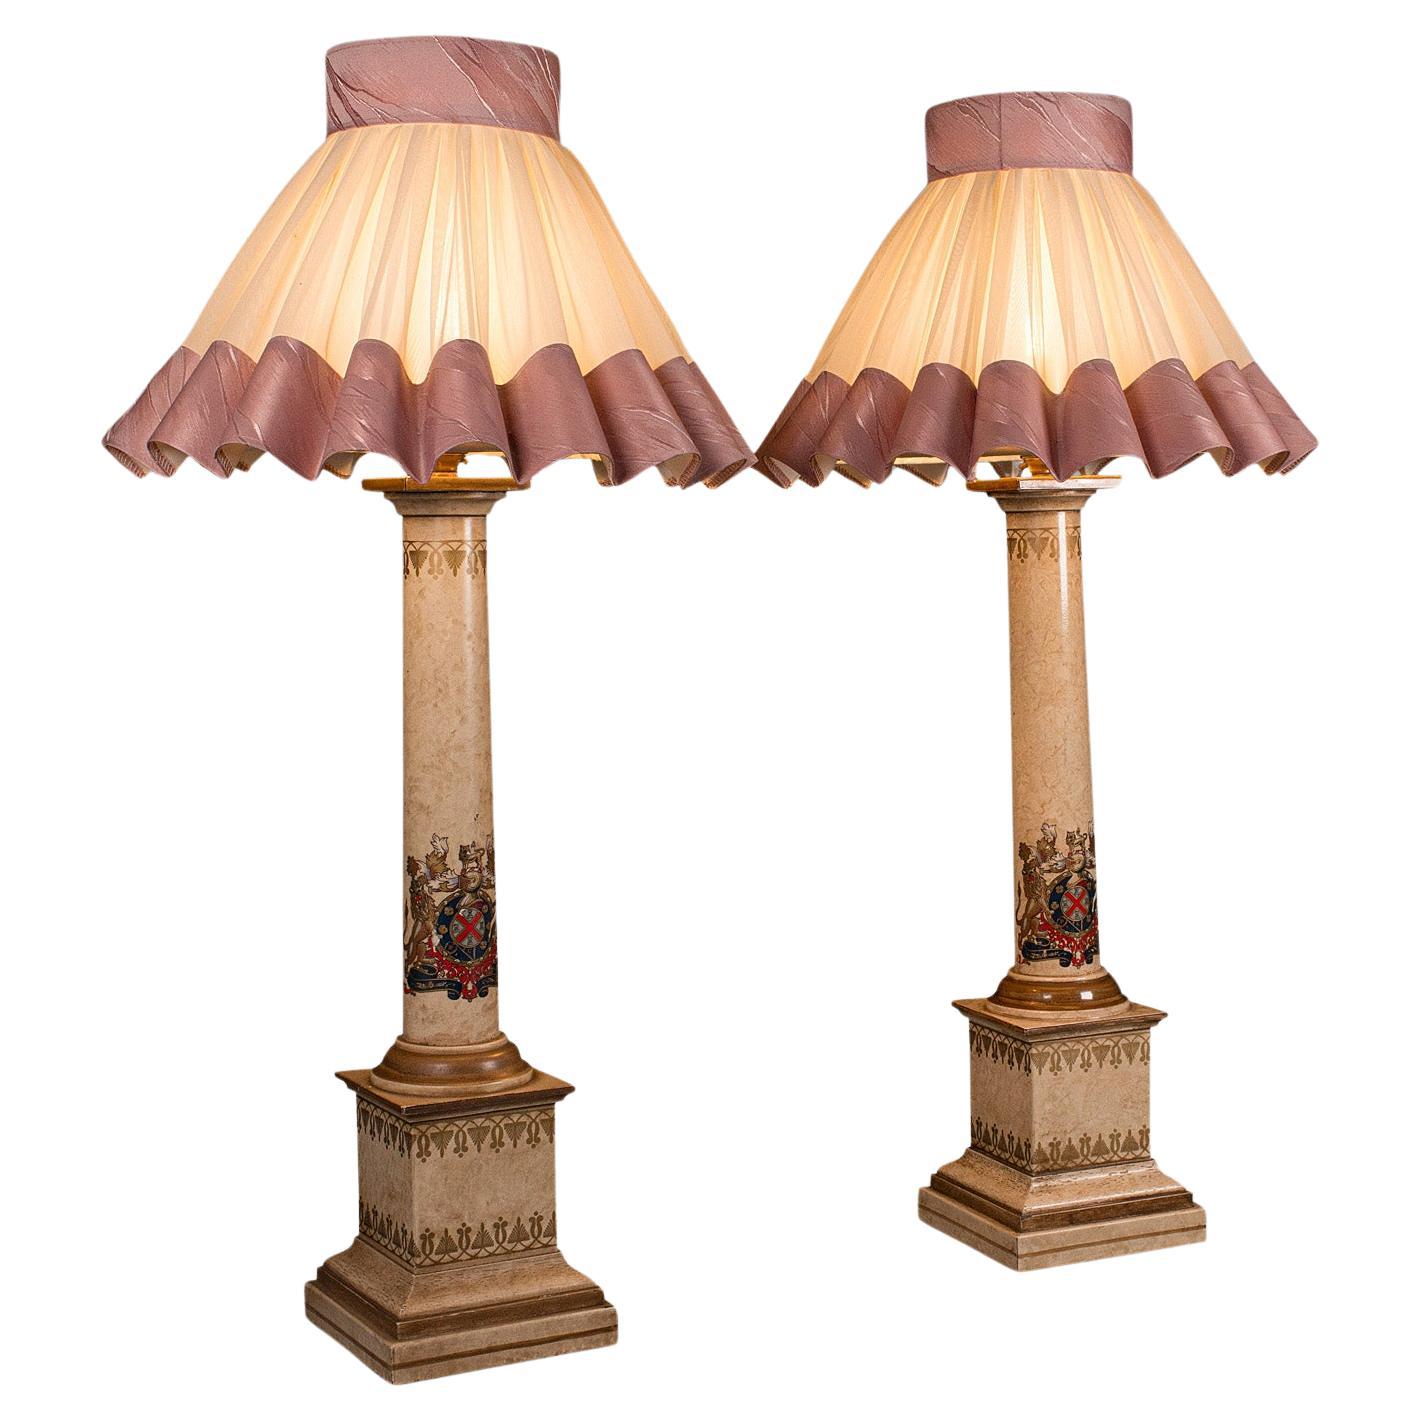 Tall Pair Of Vintage Table Lamps, English, Decorative Light, Mid Century, C.1960 For Sale